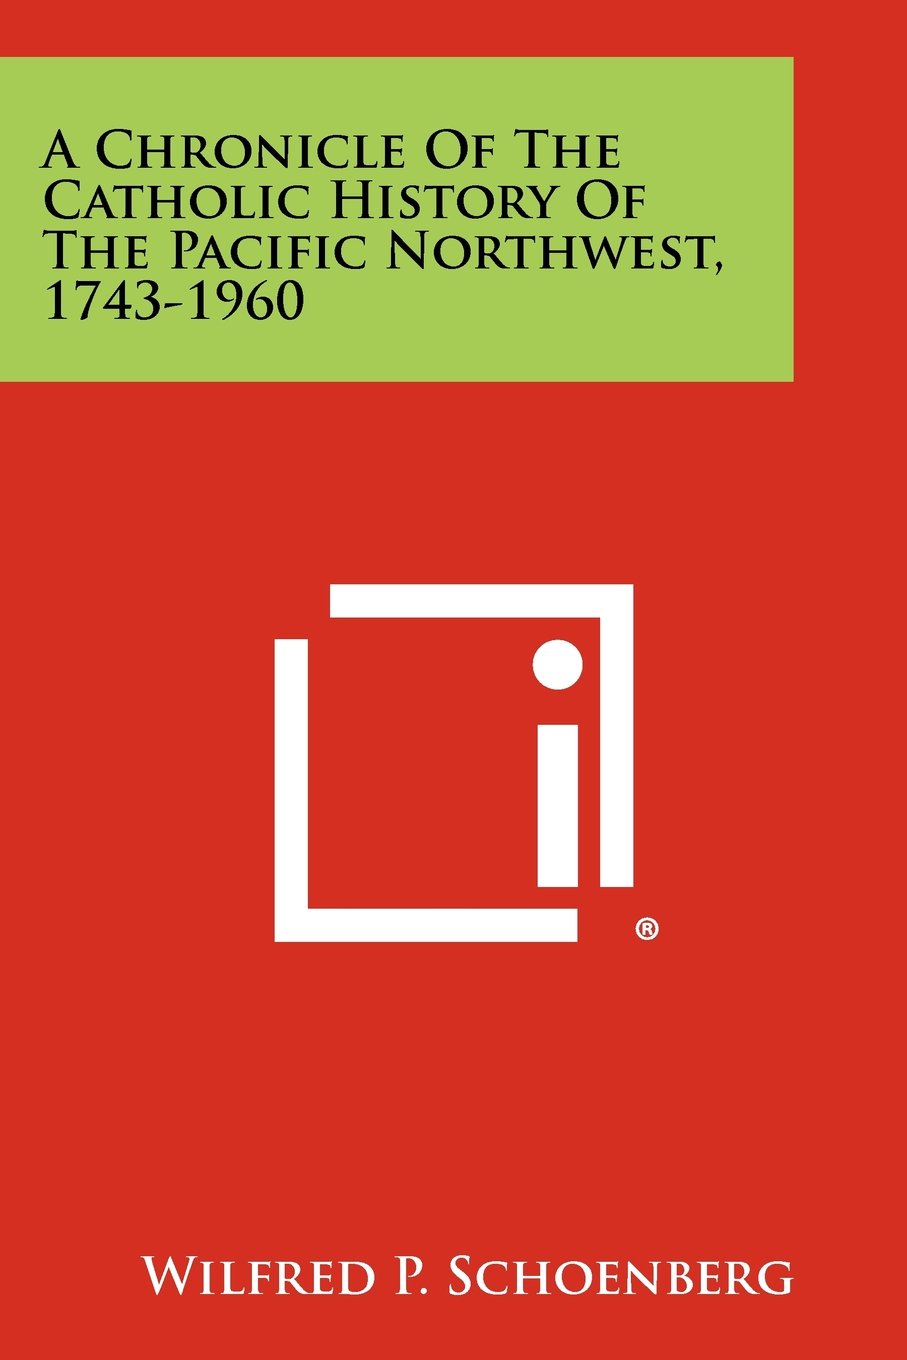 A chronicle of the Catholic history of the Pacific Northwest, 1743-1960 (book cover)